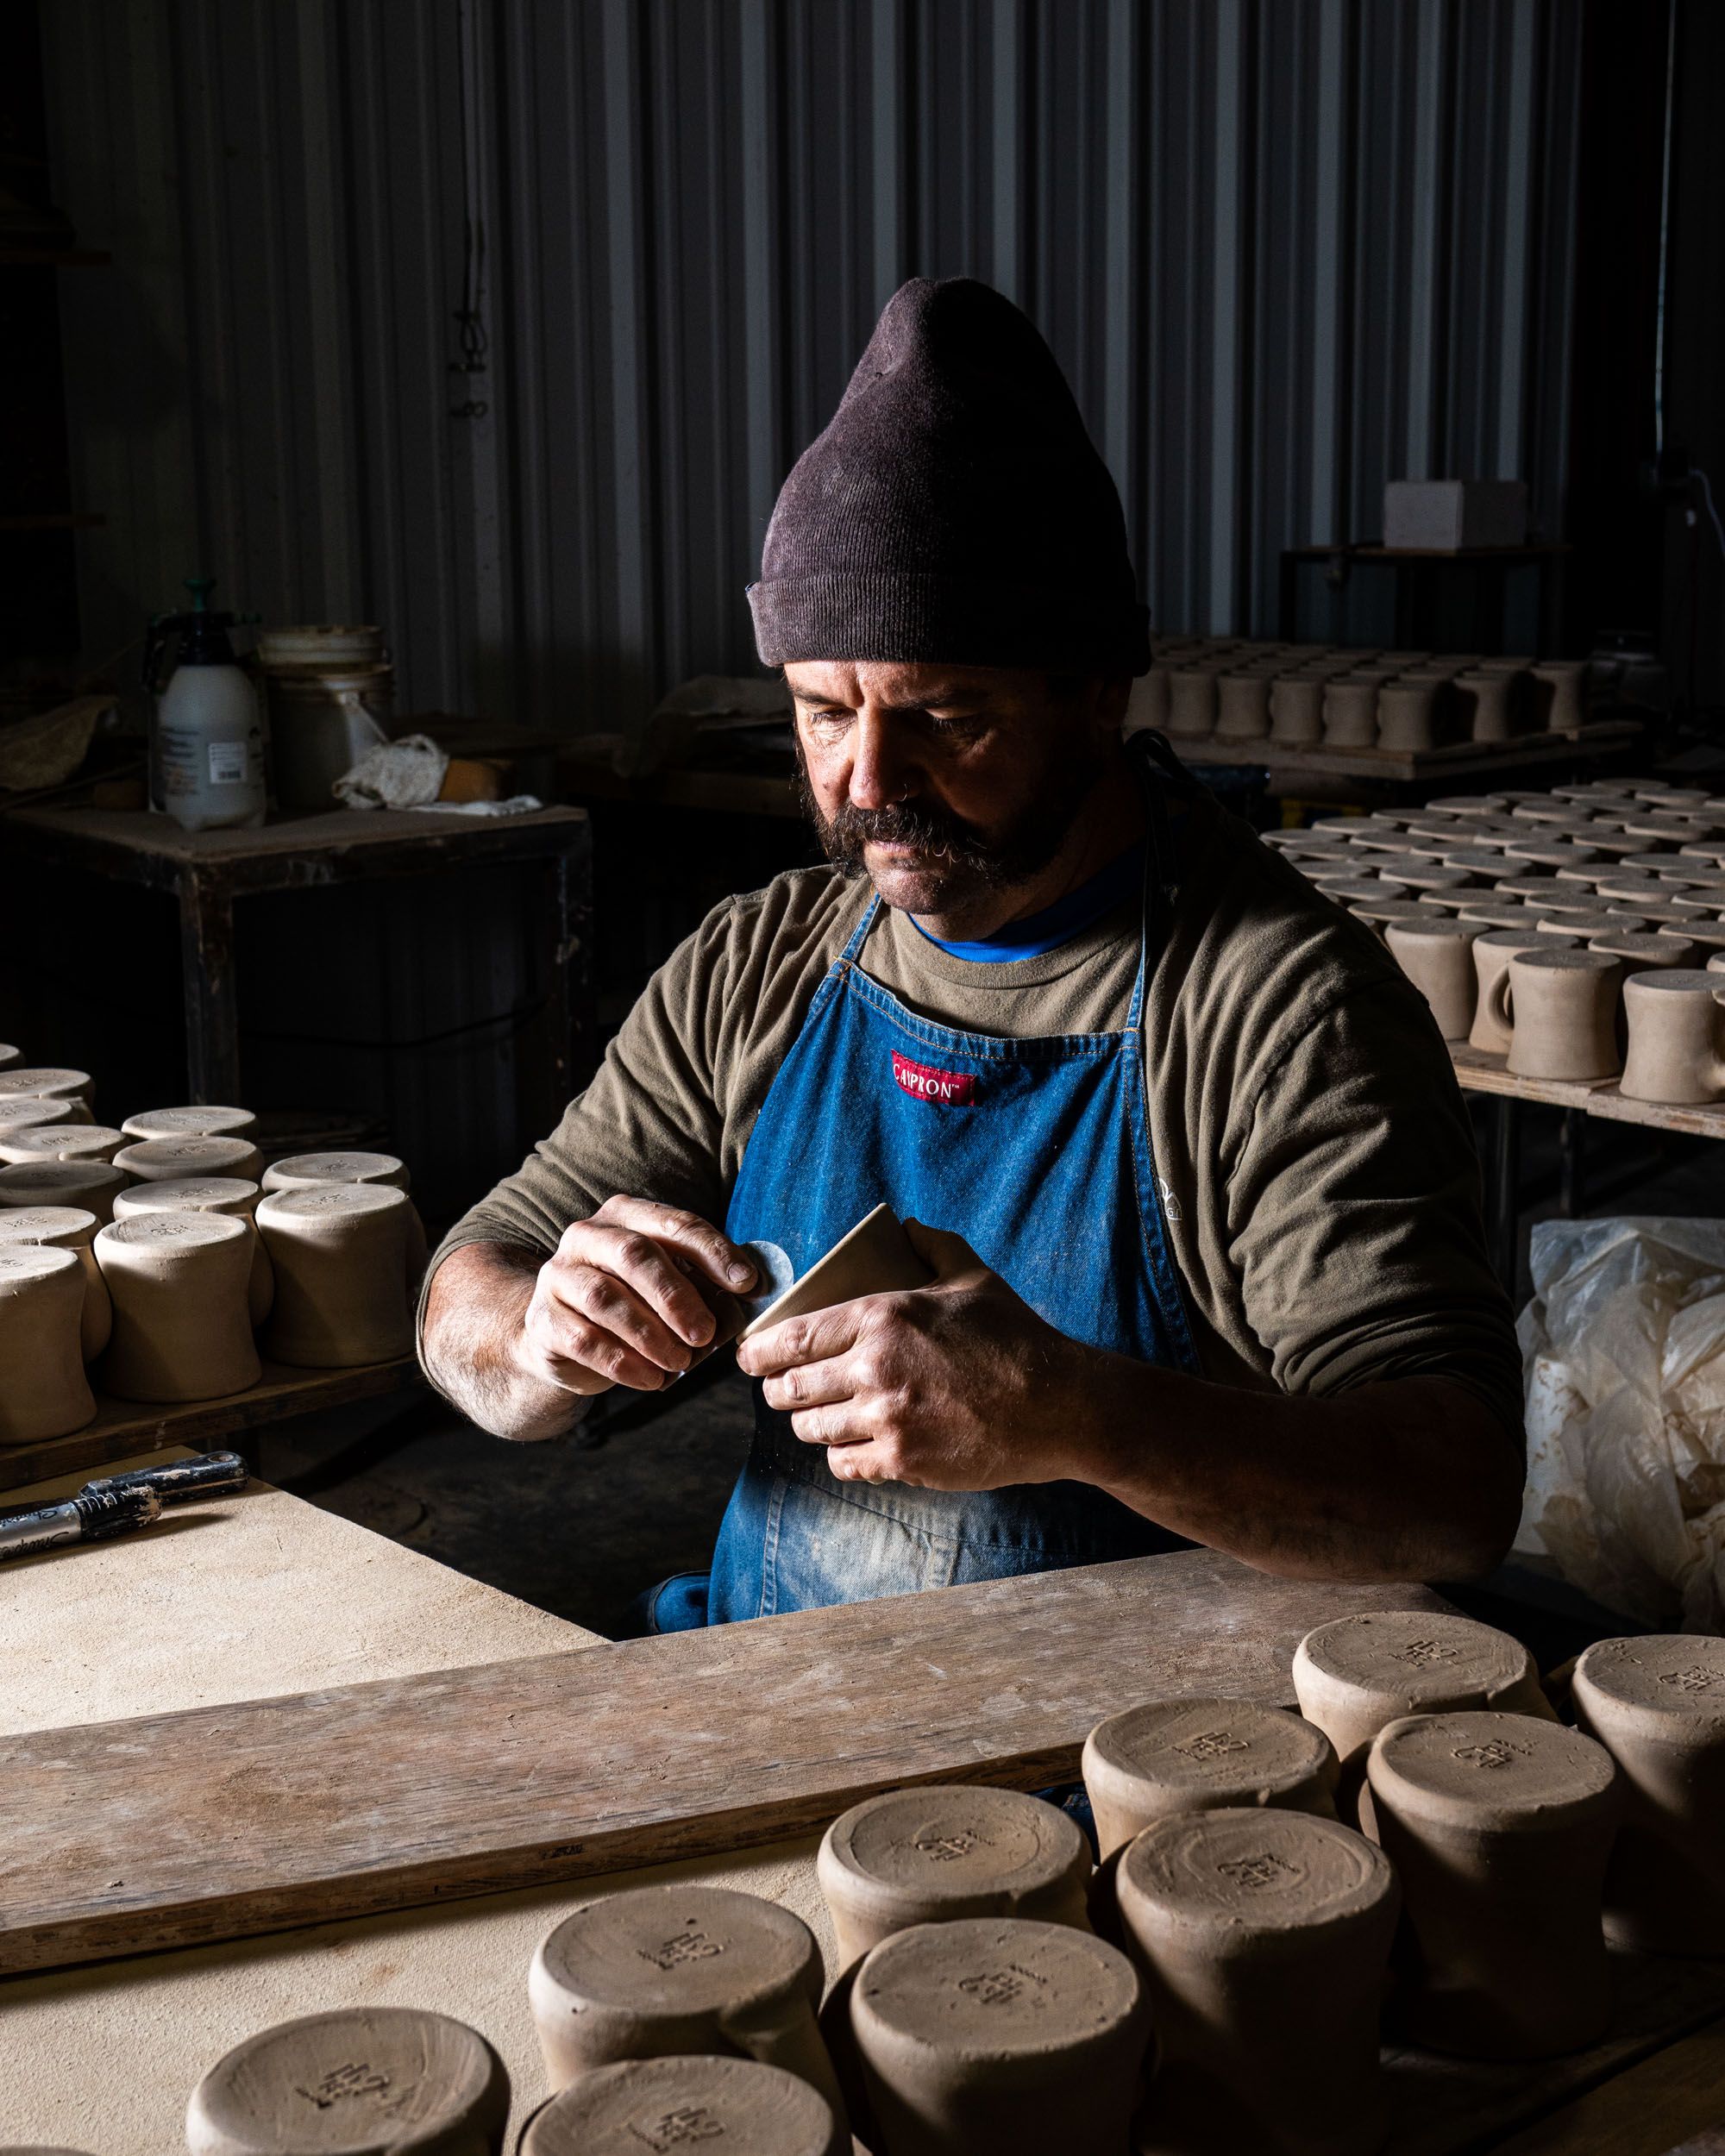 In a pottery studio setting, a man is forming the bottom base of a Diner Mug. Surrounding him are hundreds of mugs.